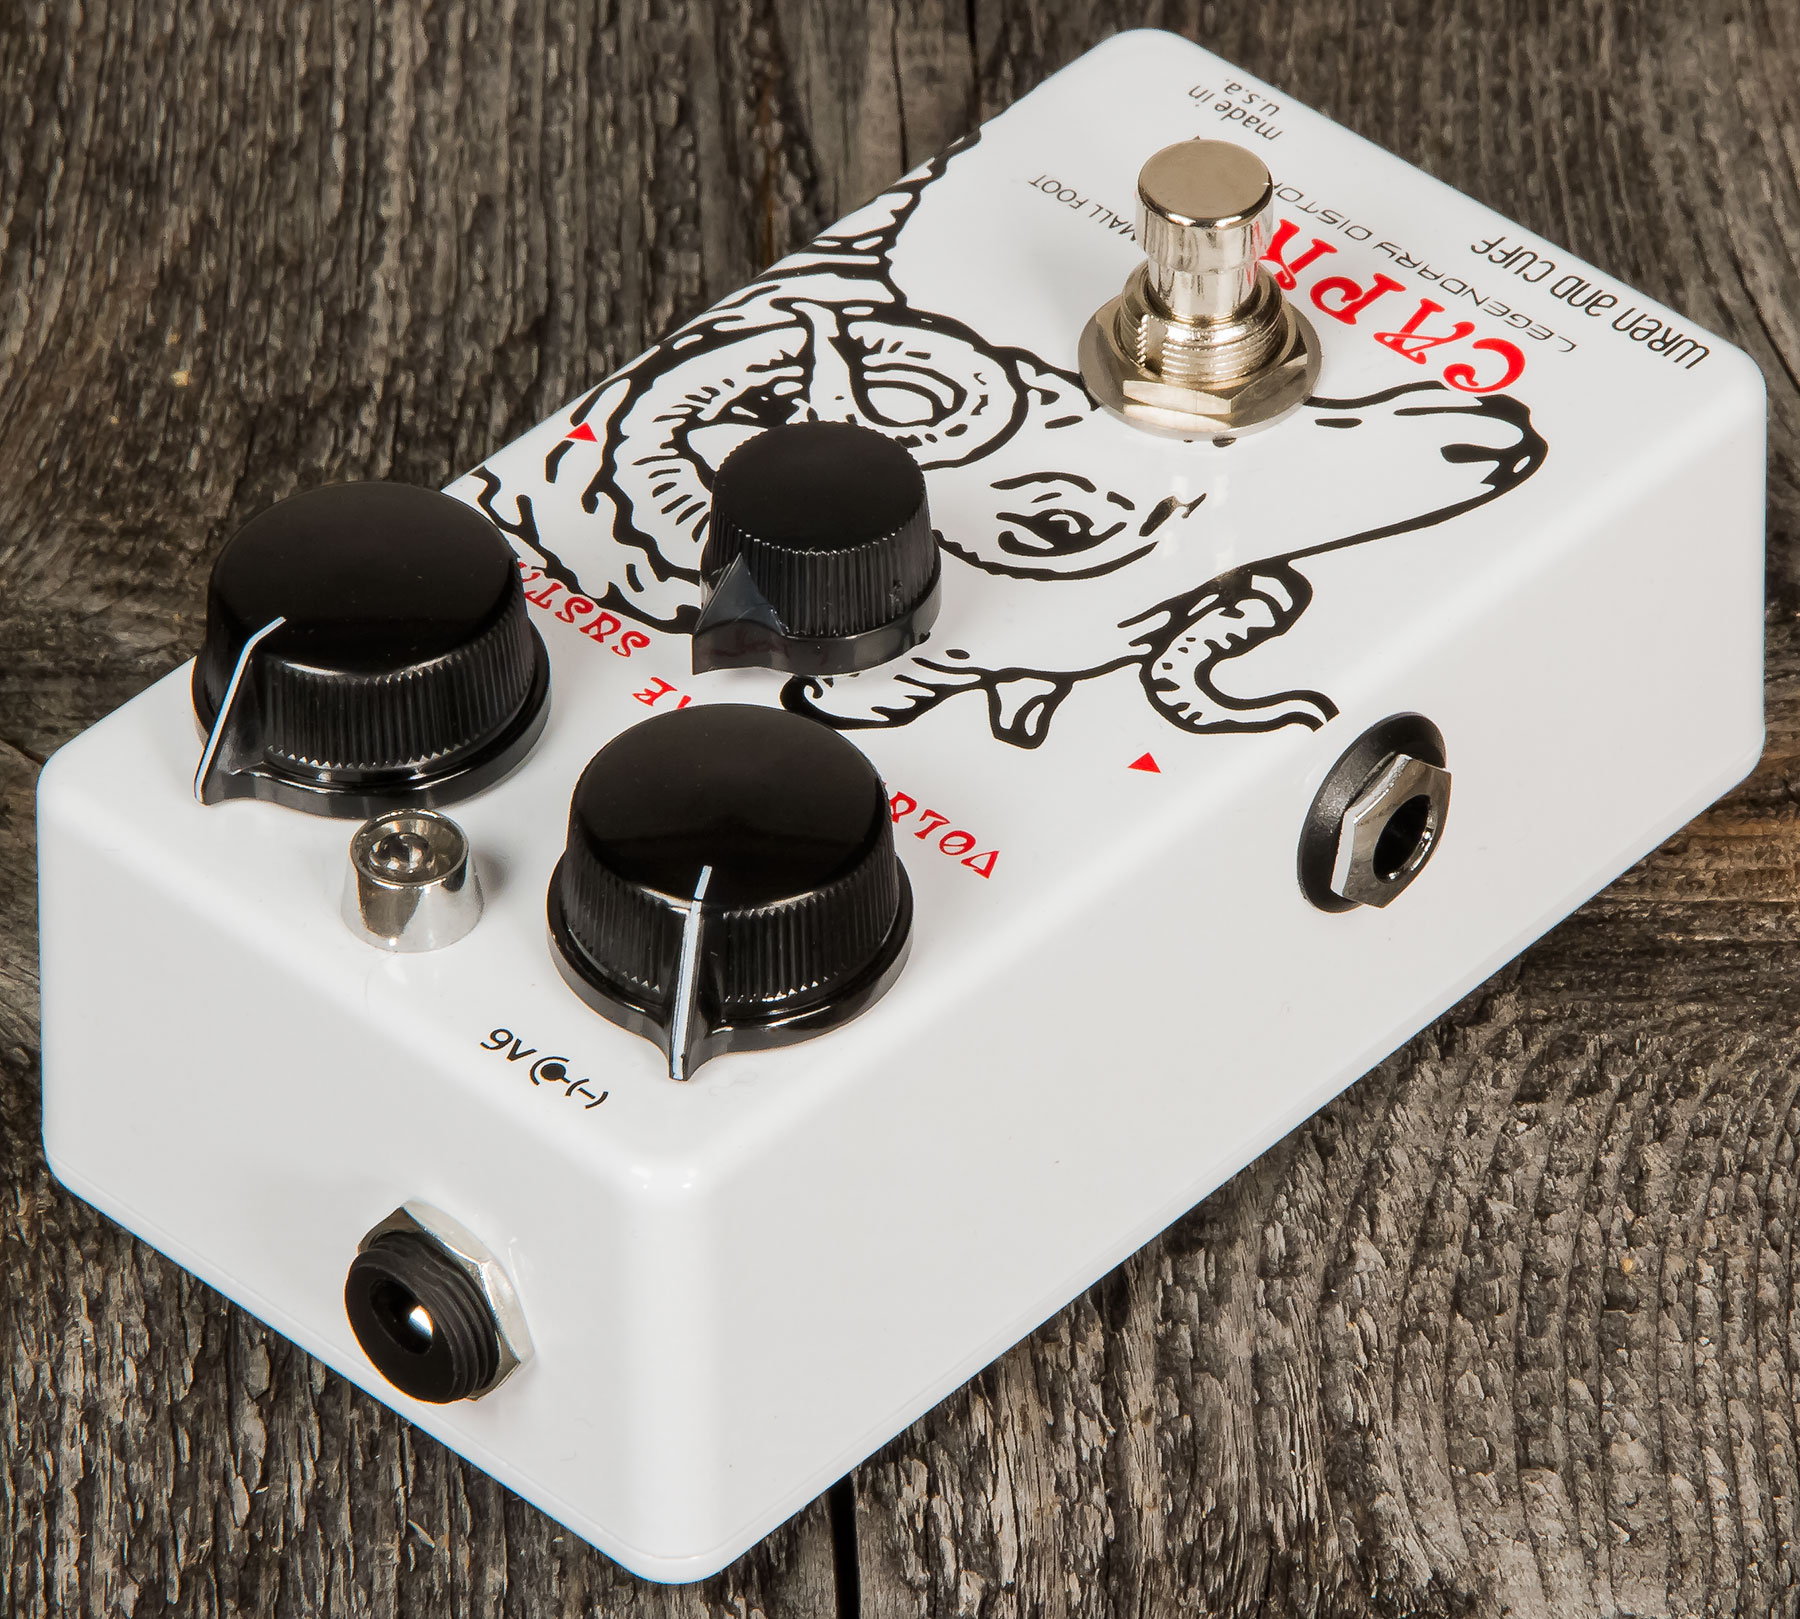 Wren And Cuff Caprid Small Foot Legendary Distortion - Overdrive, distortion & fuzz effect pedal - Variation 2